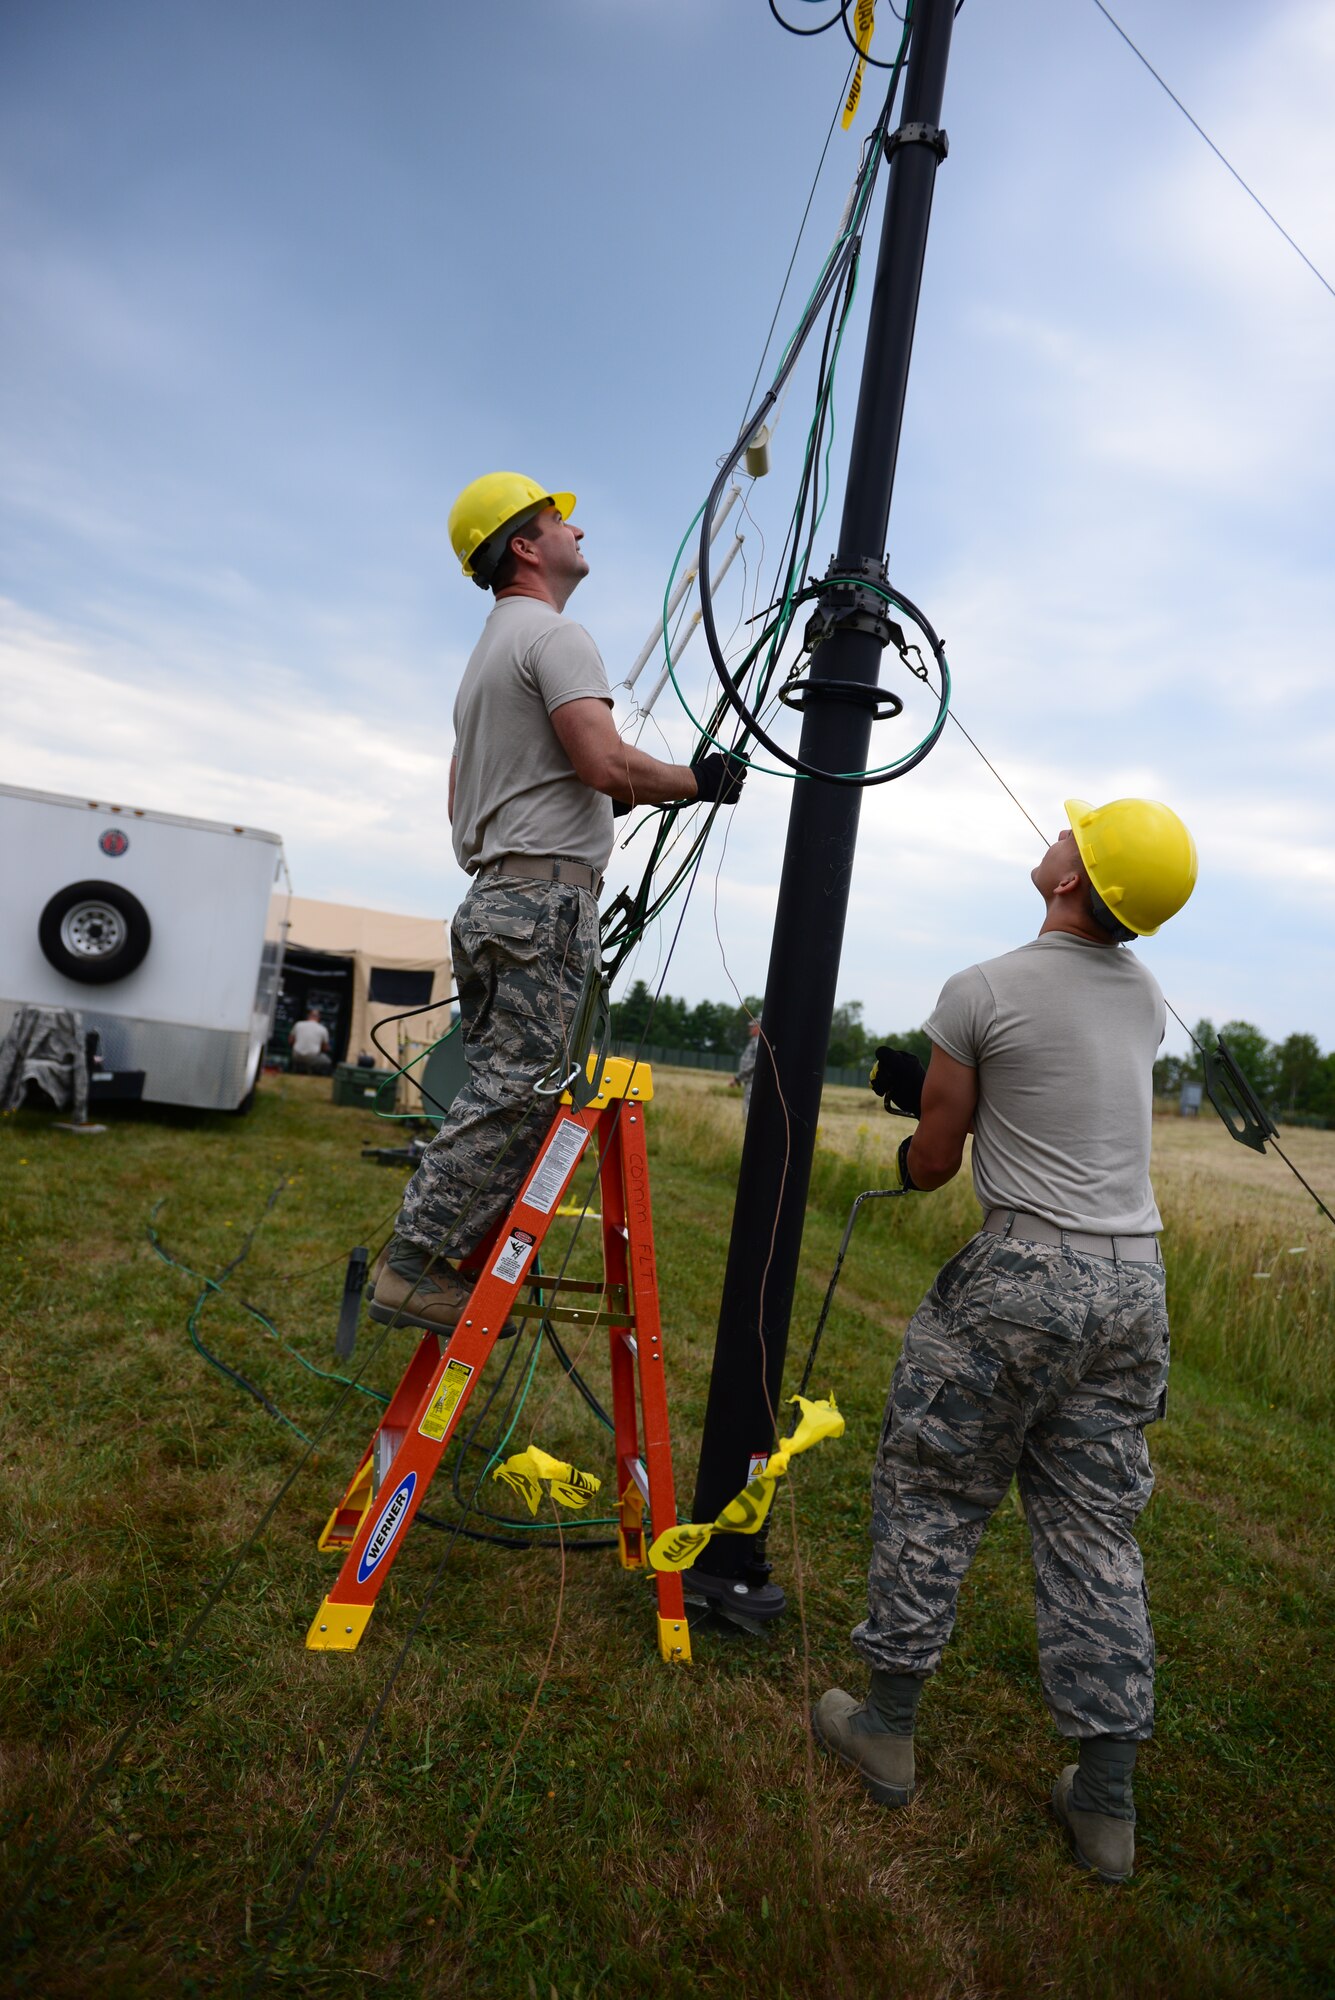 From the left, Senior Airman Robert Bell, and Senior Airman Matthew Barricklow, both from the 157th Communications Flight, adjust the height of a radio communication antenna during a training exercise at the New Hampshire Air National Guard Training Site in Center Stratford, N.H., Aug. 6. The antenna was part of the Joint Incident Site Communications Capability (JISCC) that was used to execute the exercise in support of domestic operations. (Air National Guard photo by Senior Airmen Kayla McWalter)  